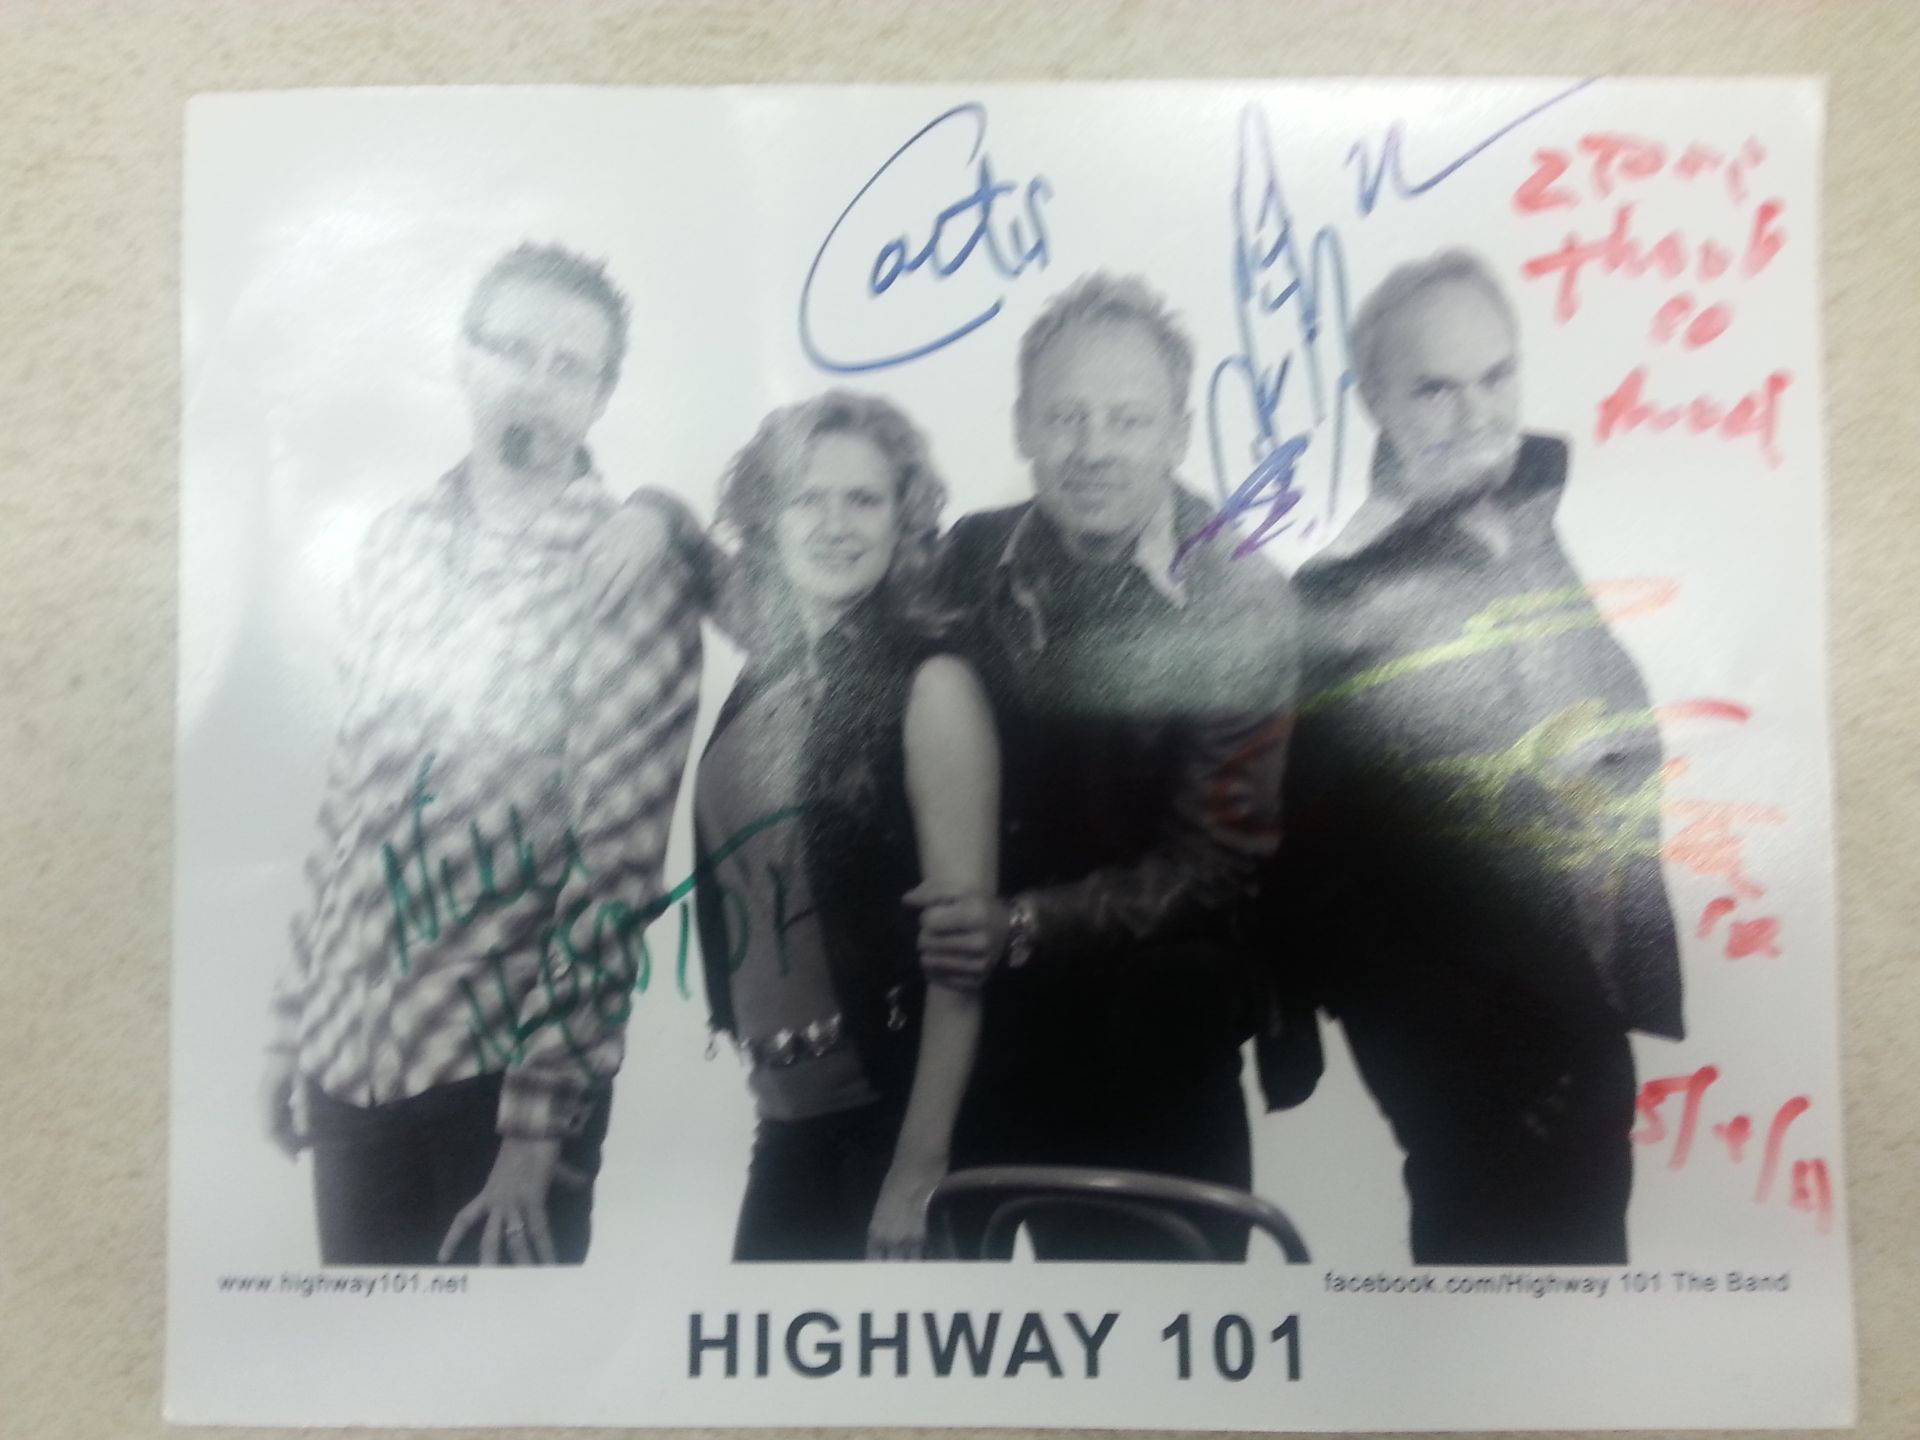 signed guitar and picture by Highway 101 - Image 2 of 3